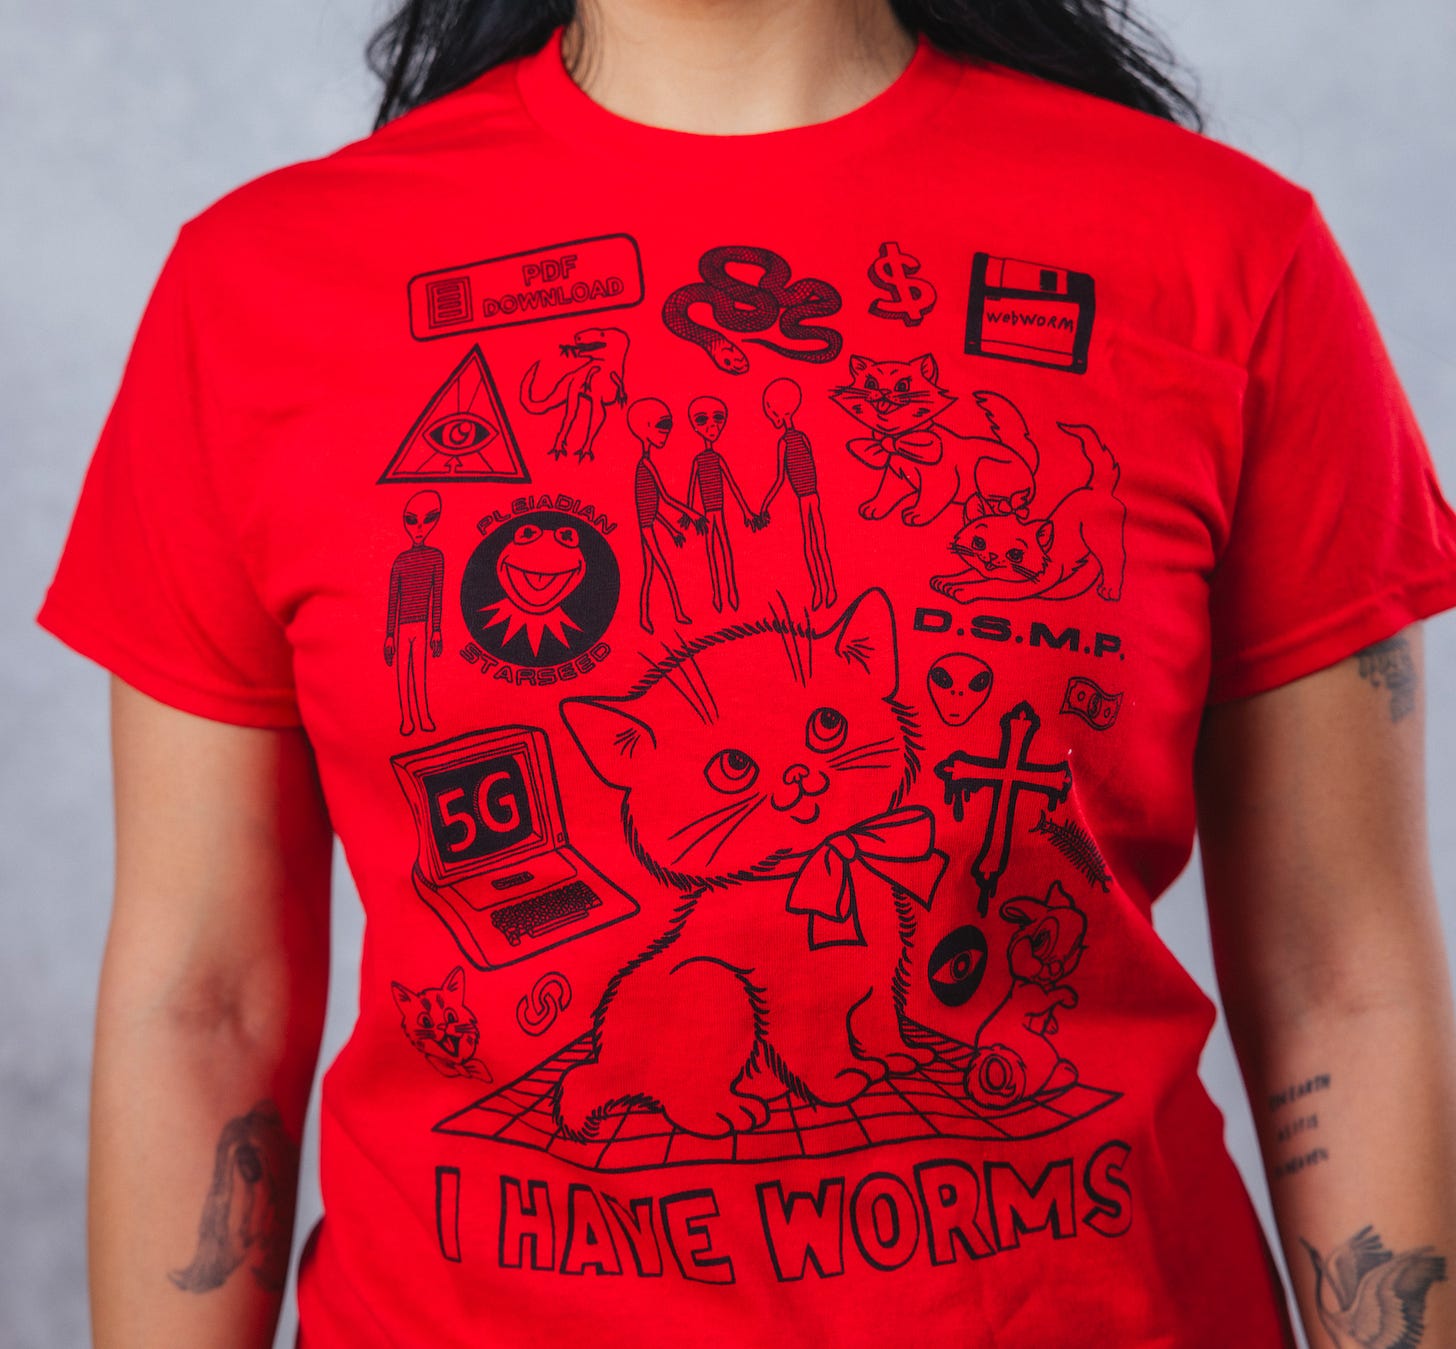 This is a red tee with black icons on it that are all Webworm related, from cats to aliens to floppy discs and 5G warnings!